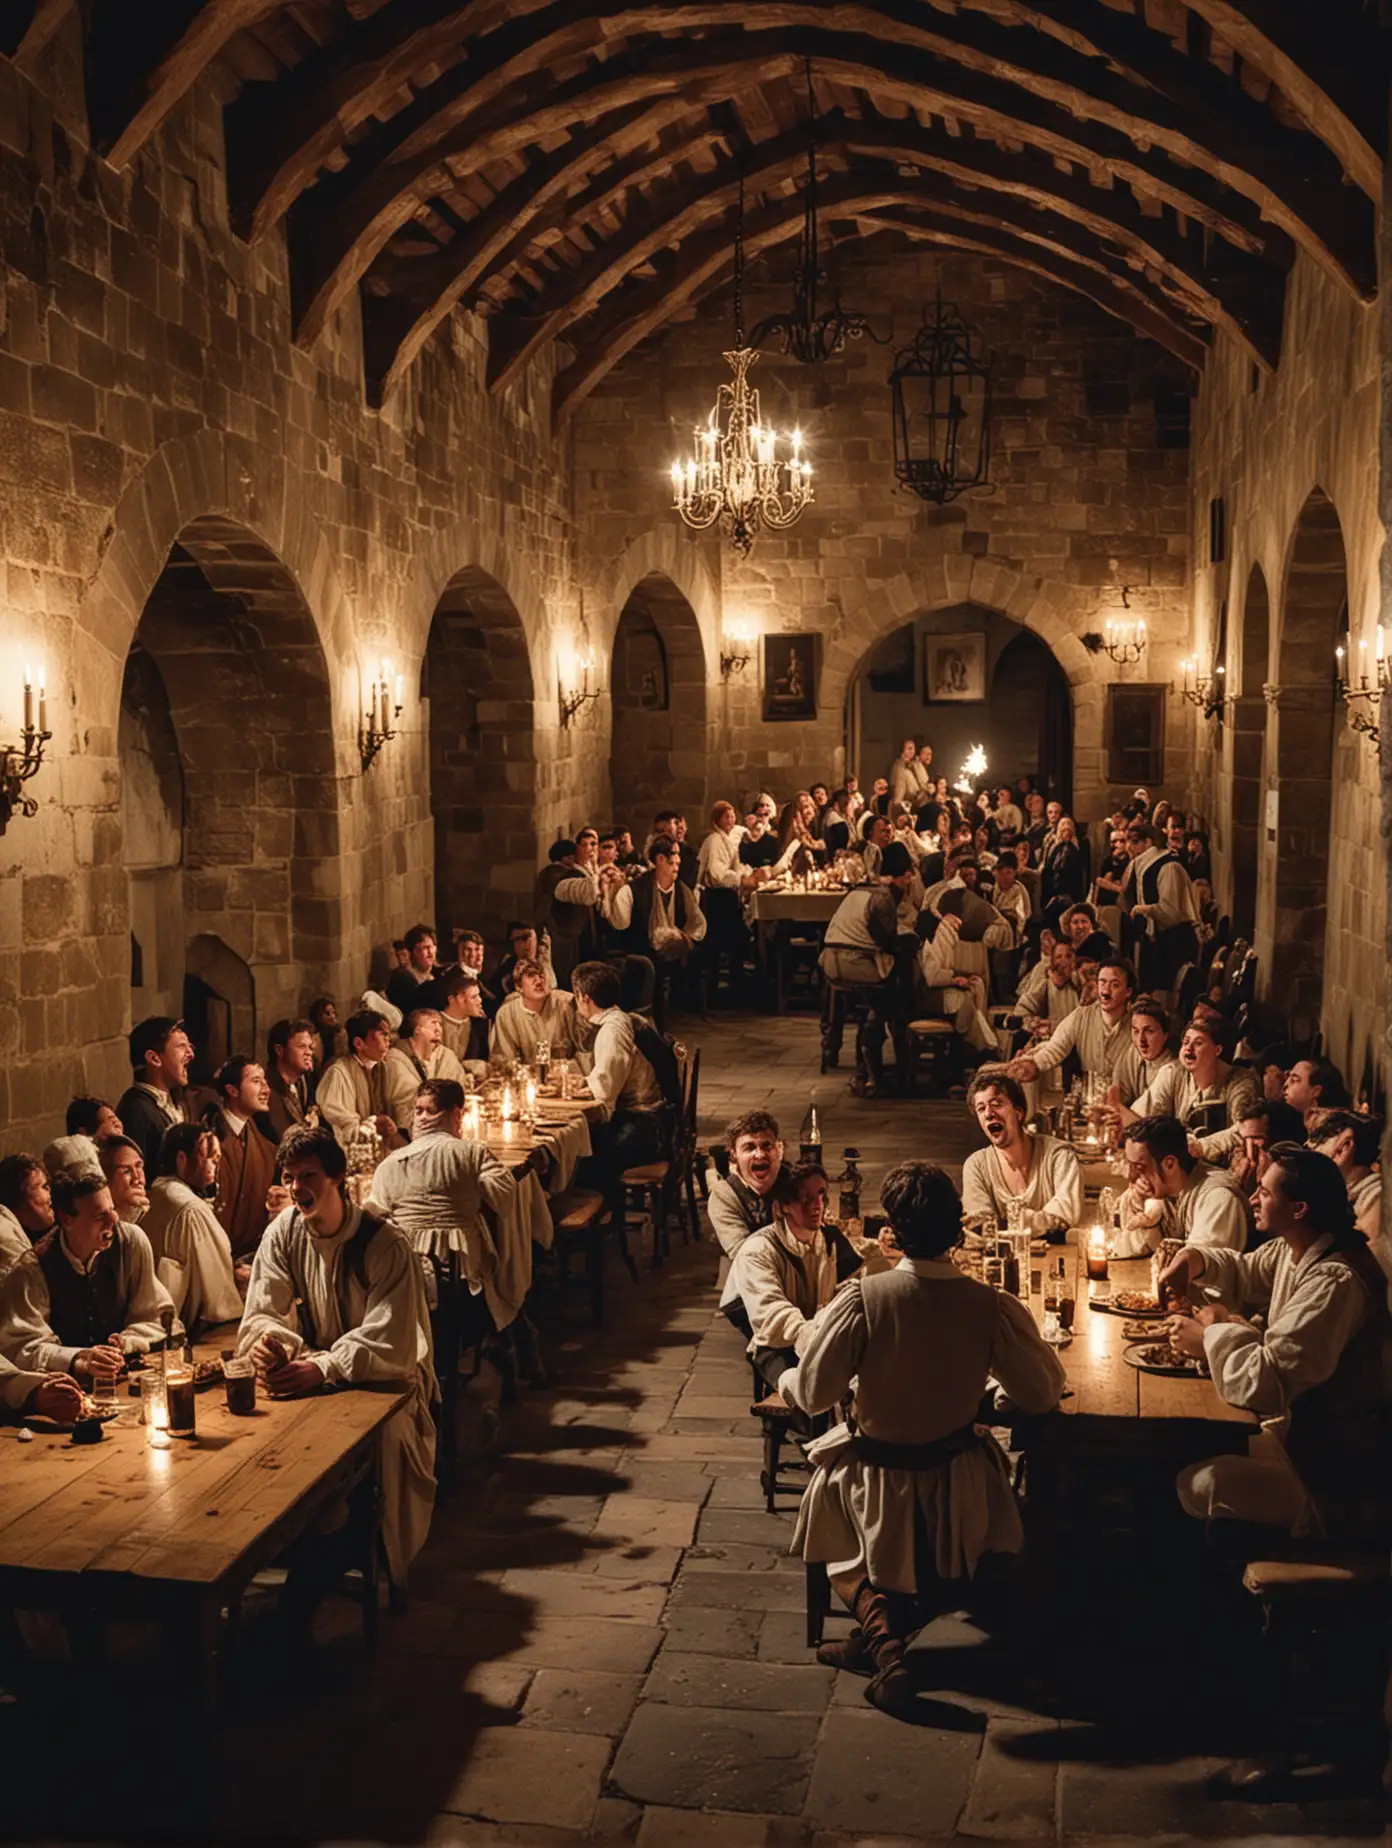 A  hall in a 17th century castle, with young men sitting on a tables and drinking, dressed with light clothing, boots, shouting, joyful and happy atmosphere, at night.